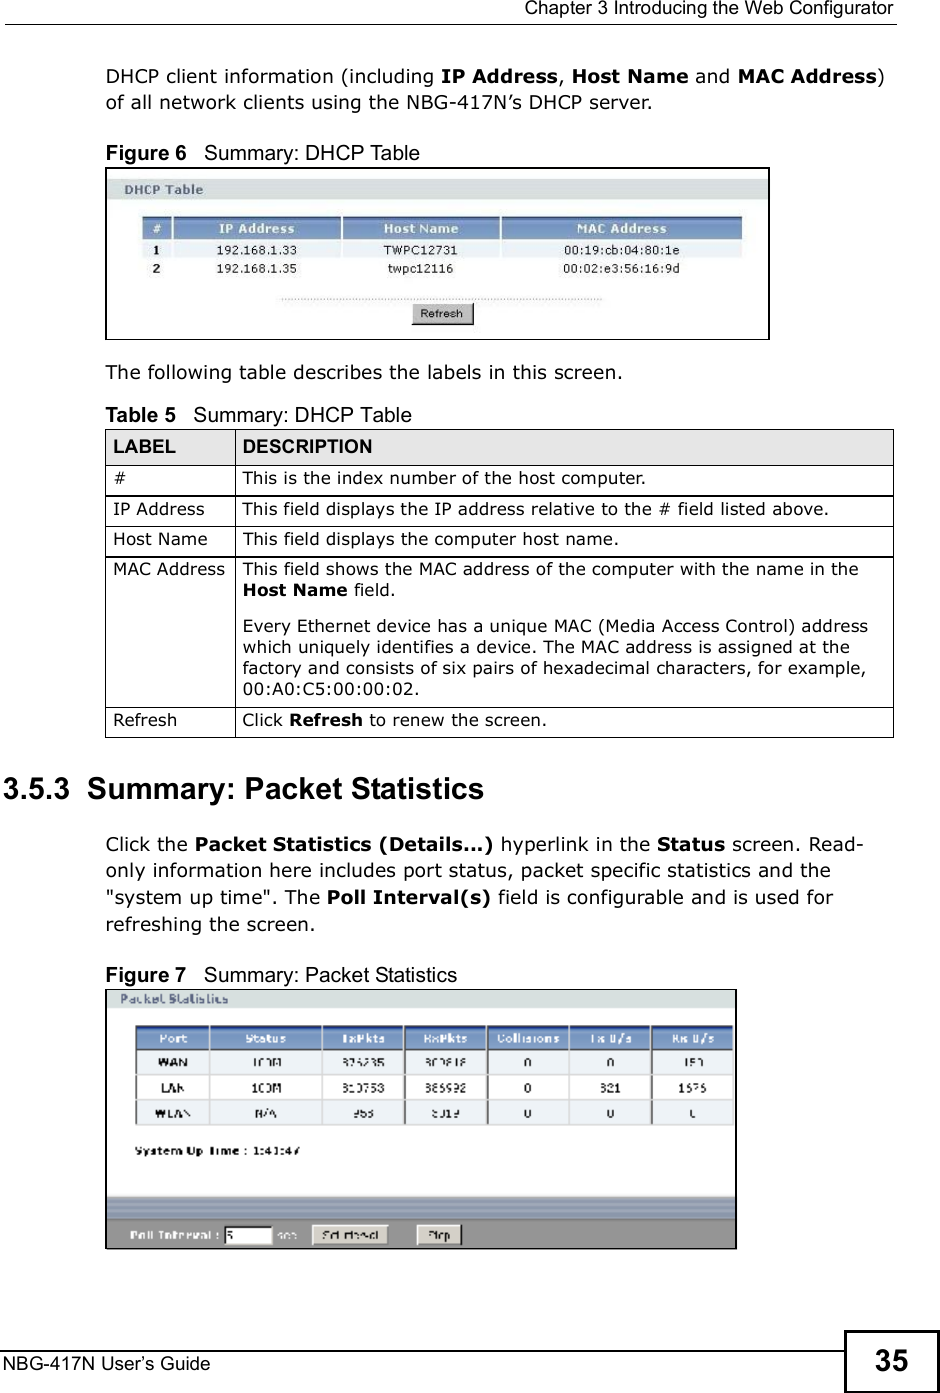  Chapter 3Introducing the Web ConfiguratorNBG-417N User s Guide 35DHCP client information (including IP Address, Host Name and MAC Address) of all network clients using the NBG-417N!s DHCP server.Figure 6   Summary: DHCP TableThe following table describes the labels in this screen.3.5.3  Summary: Packet Statistics   Click the Packet Statistics (Details...) hyperlink in the Status screen. Read-only information here includes port status, packet specific statistics and the &quot;system up time&quot;. The Poll Interval(s) field is configurable and is used for refreshing the screen.Figure 7   Summary: Packet Statistics Table 5   Summary: DHCP TableLABEL  DESCRIPTION# This is the index number of the host computer.IP AddressThis field displays the IP address relative to the # field listed above.Host Name This field displays the computer host name.MAC AddressThis field shows the MAC address of the computer with the name in the Host Name field.Every Ethernet device has a unique MAC (Media Access Control) address which uniquely identifies a device. The MAC address is assigned at the factory and consists of six pairs of hexadecimal characters, for example, 00:A0:C5:00:00:02.RefreshClick Refresh to renew the screen. 